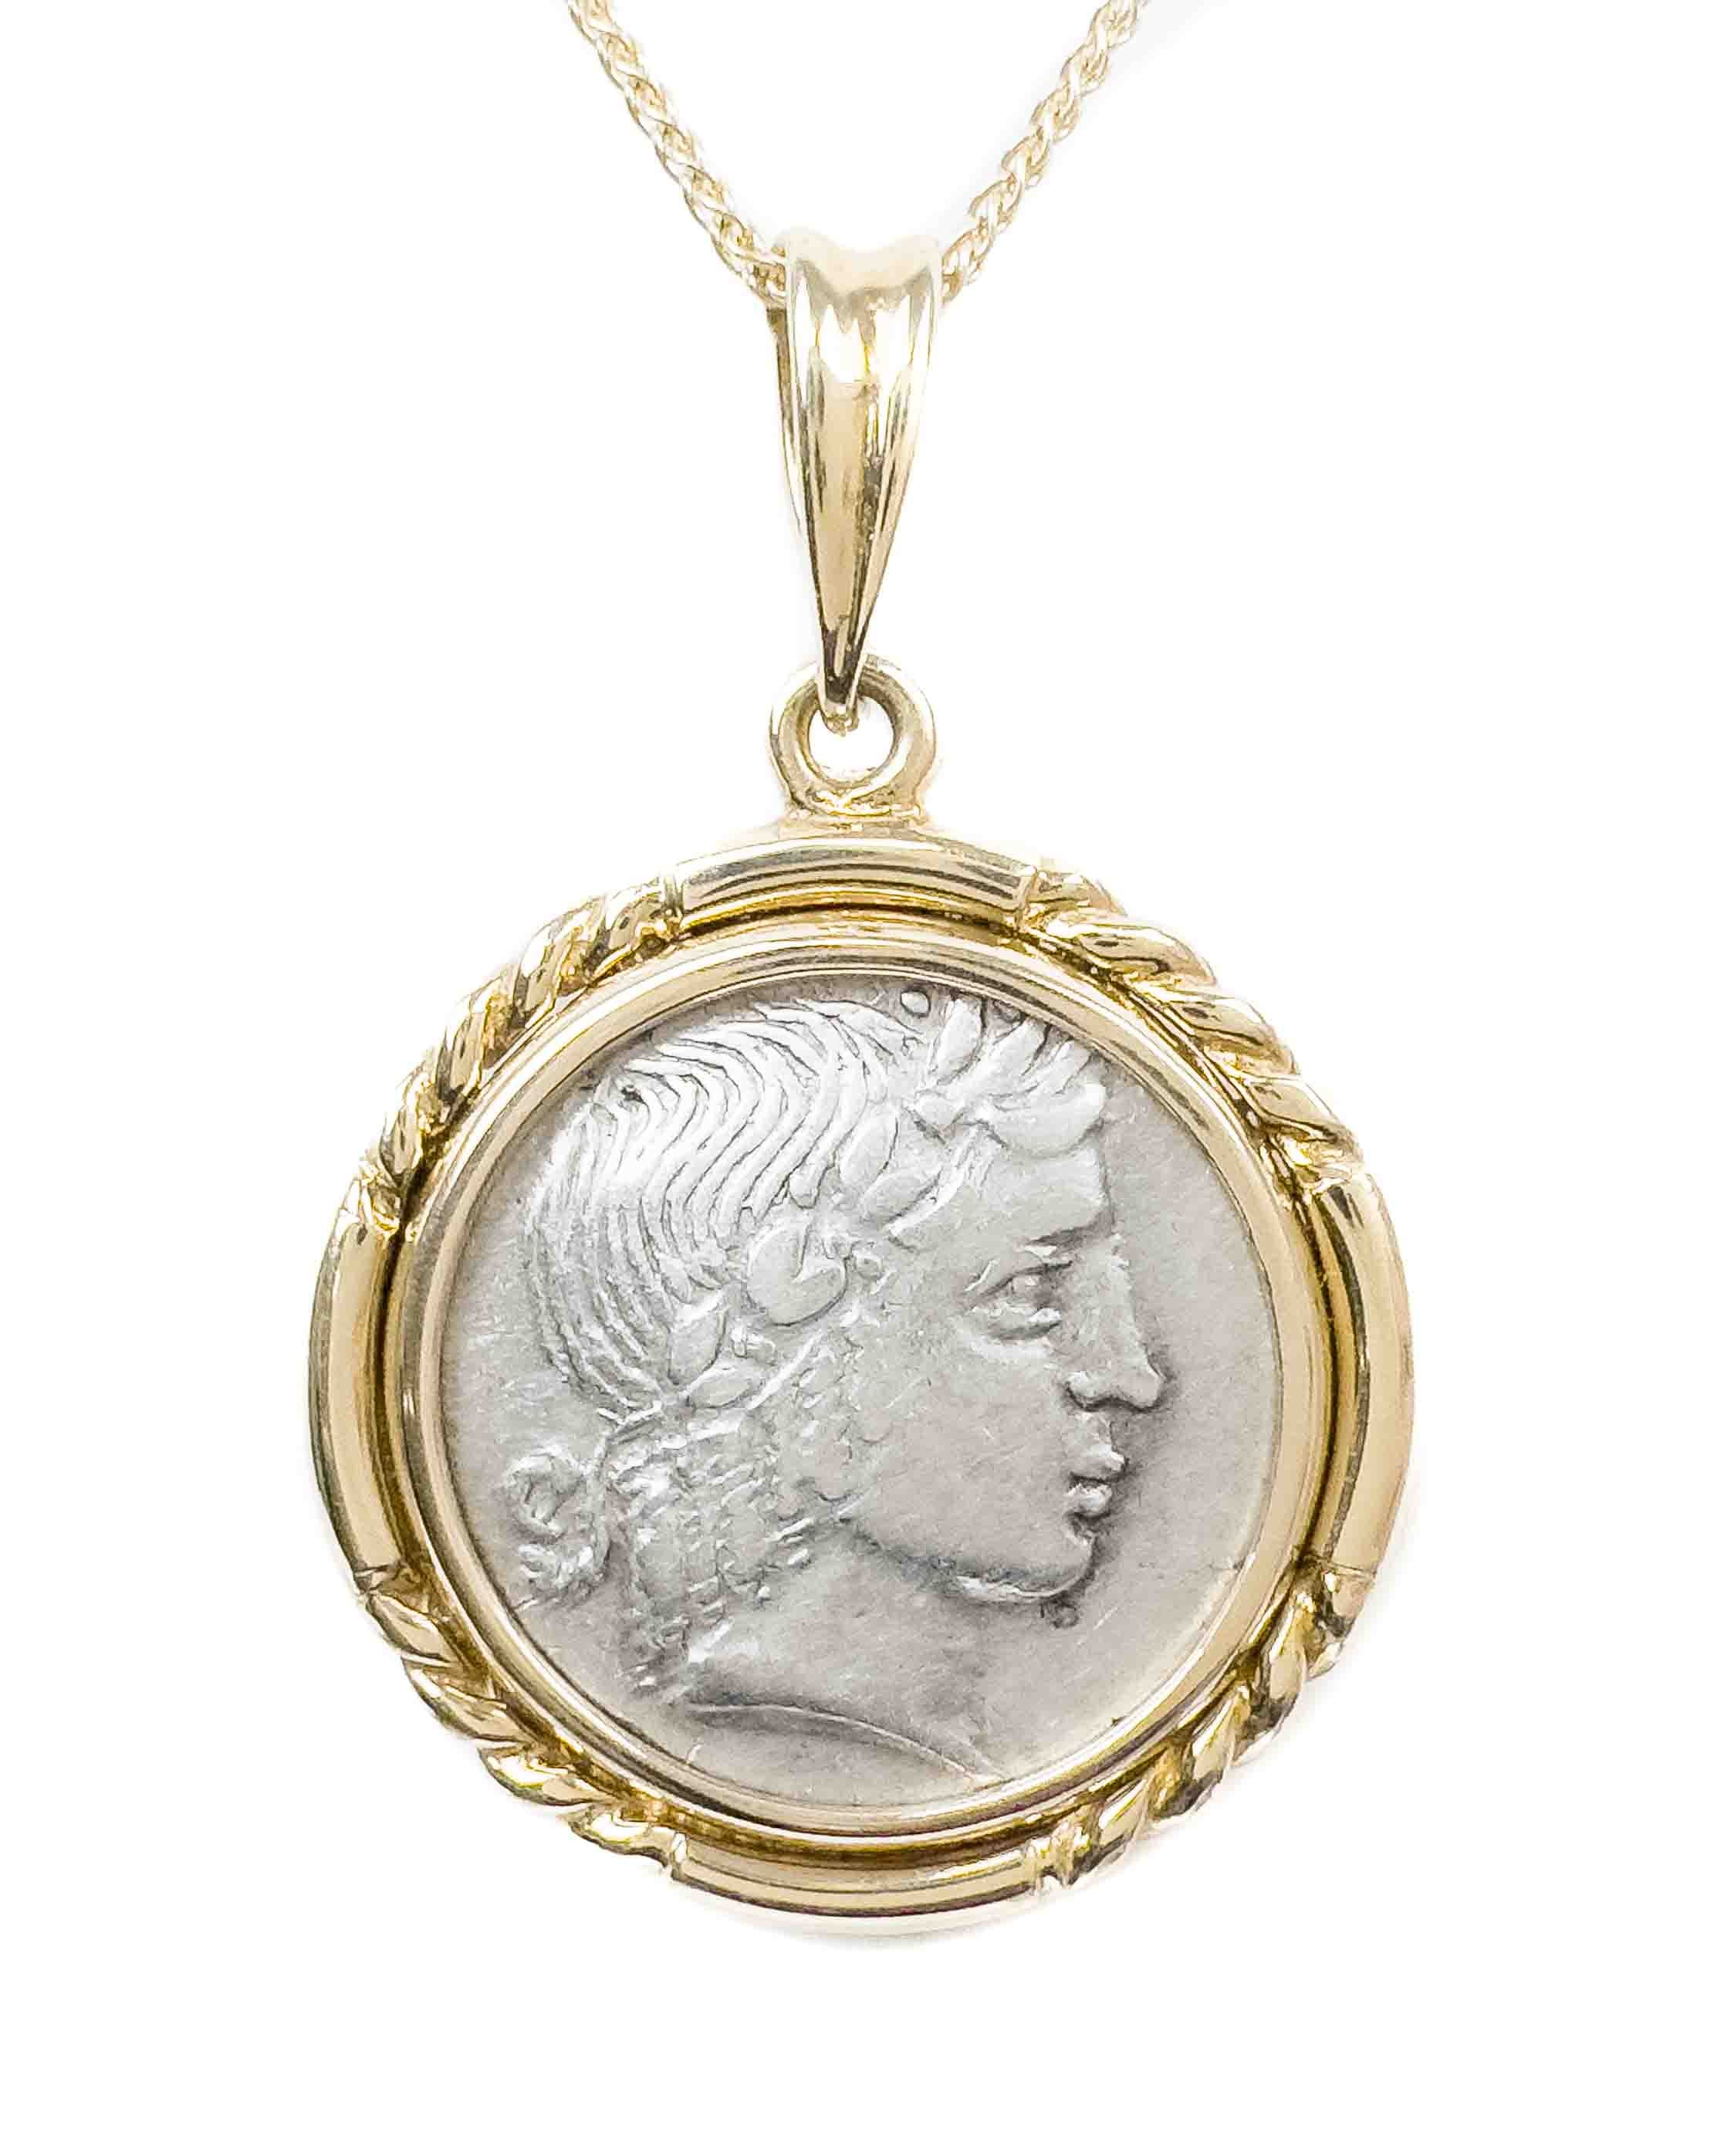 Ancient Greek coin in a 14k Gold Pendant - Bust of Dionysos